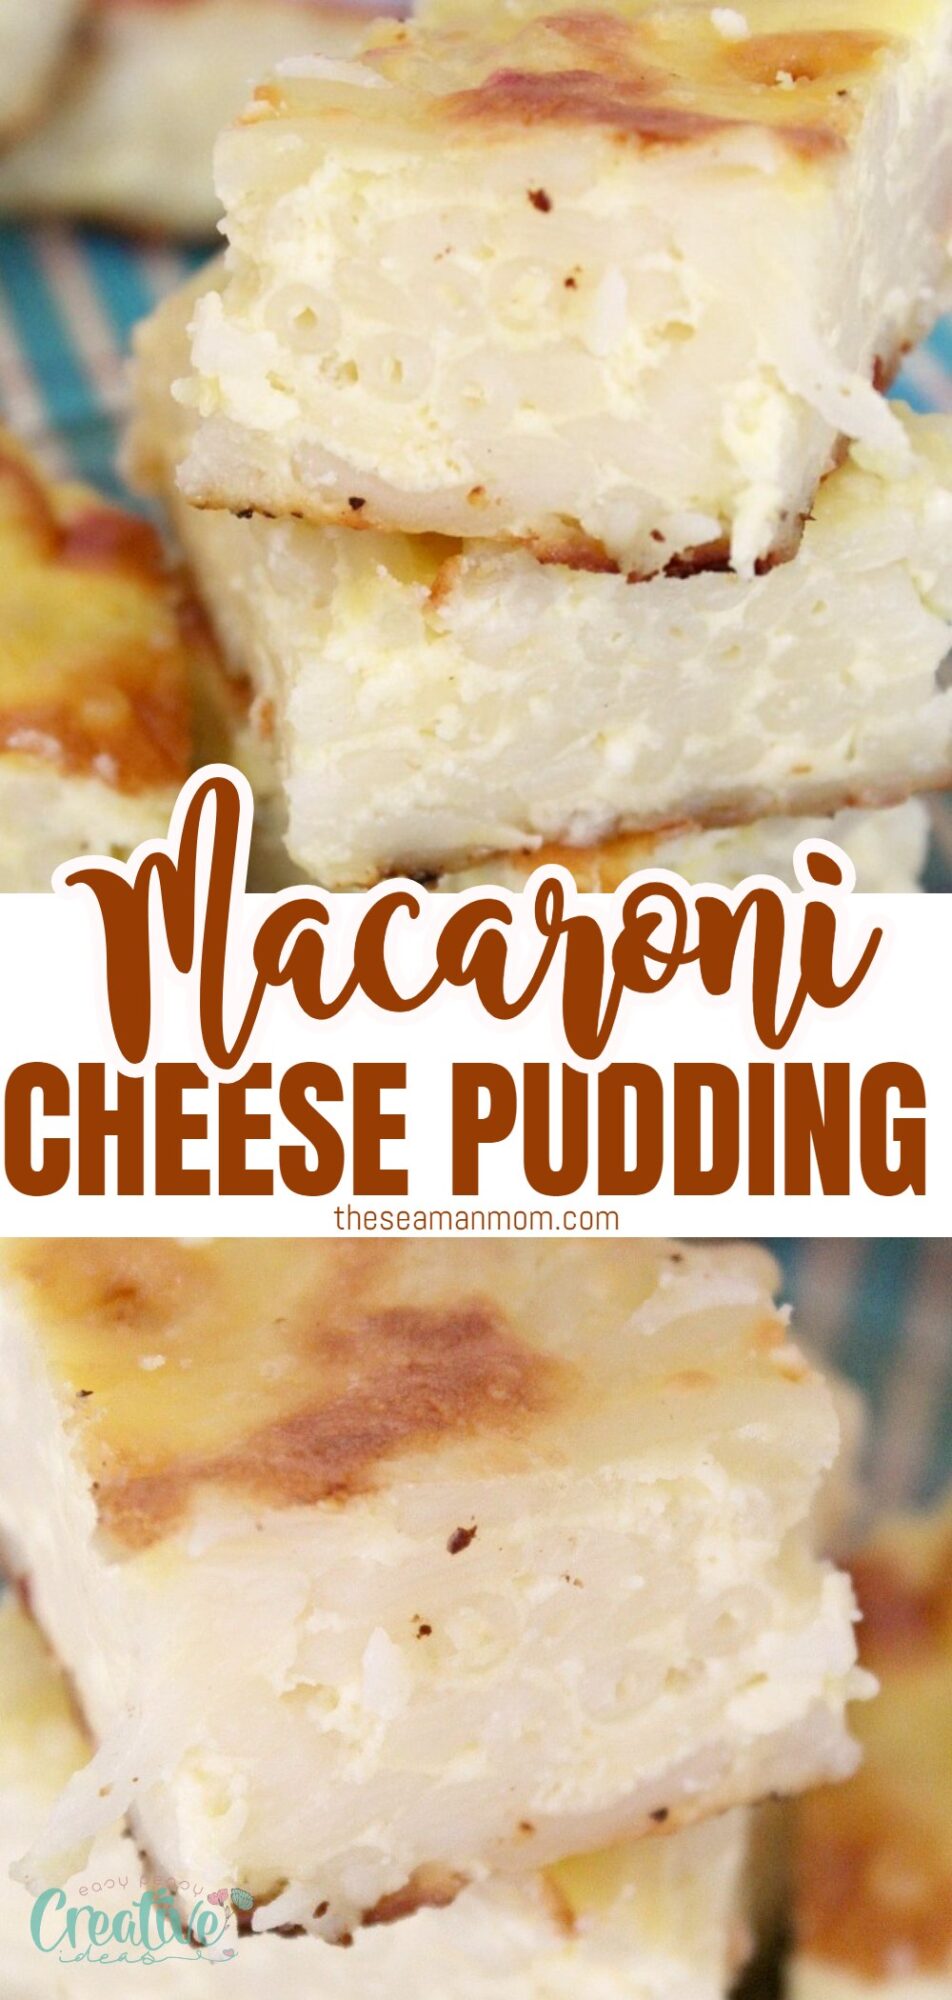 Delicious macaroni pudding recipe with sheep's cheese, vanilla, and lemon. Easy to make and perfect for picky eaters!